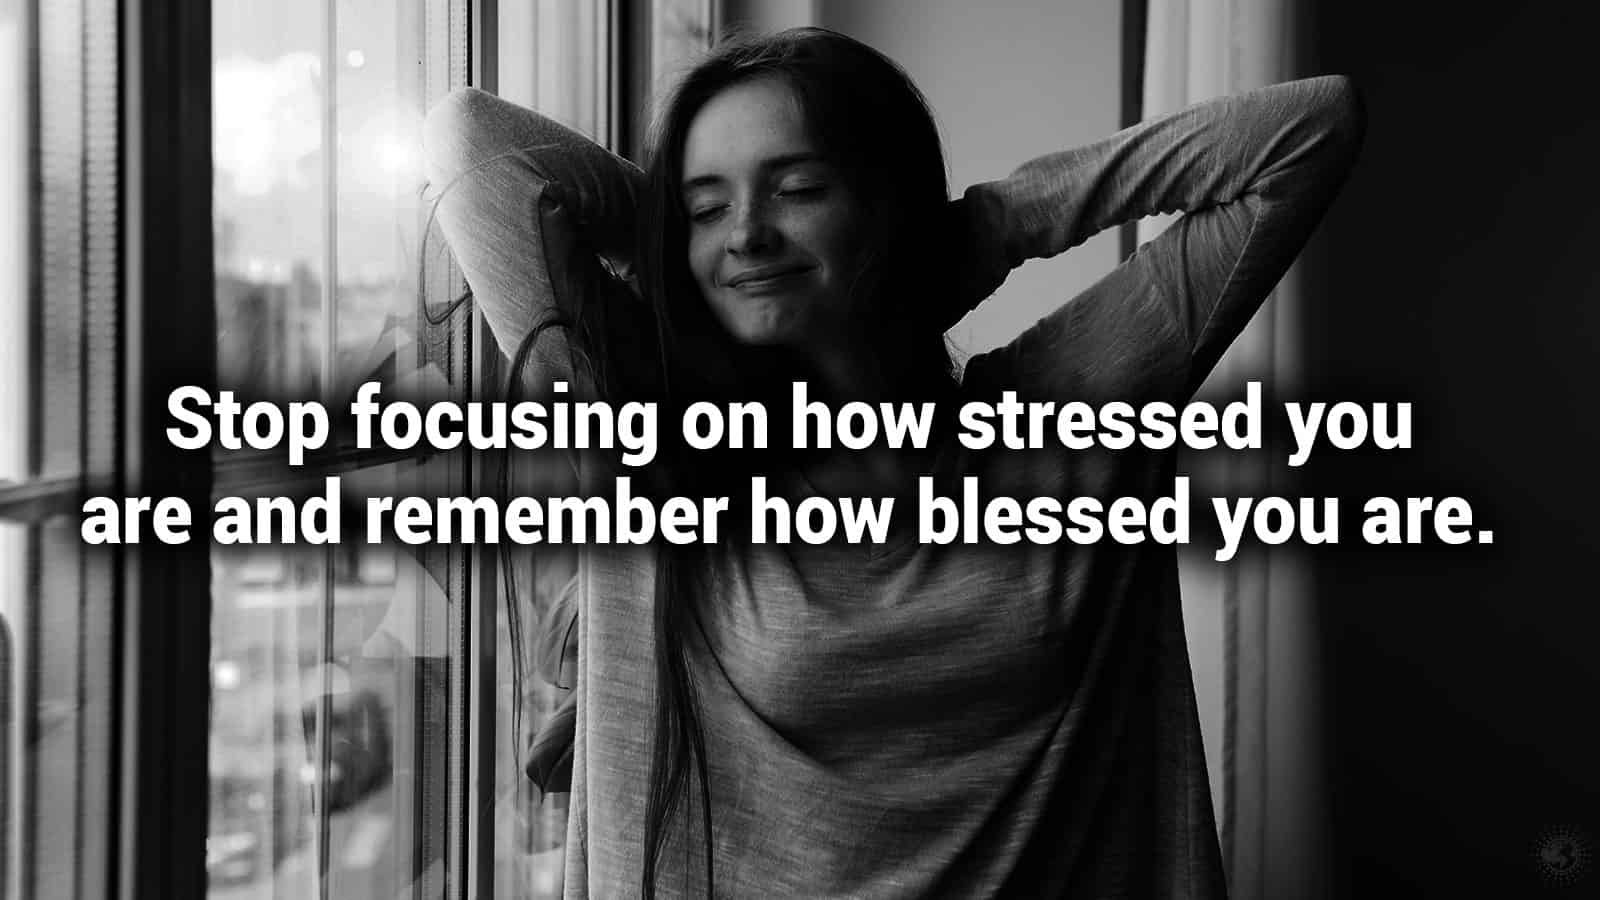 Stop-focusing-on-how-stressed-you-are-and-remember.jpg